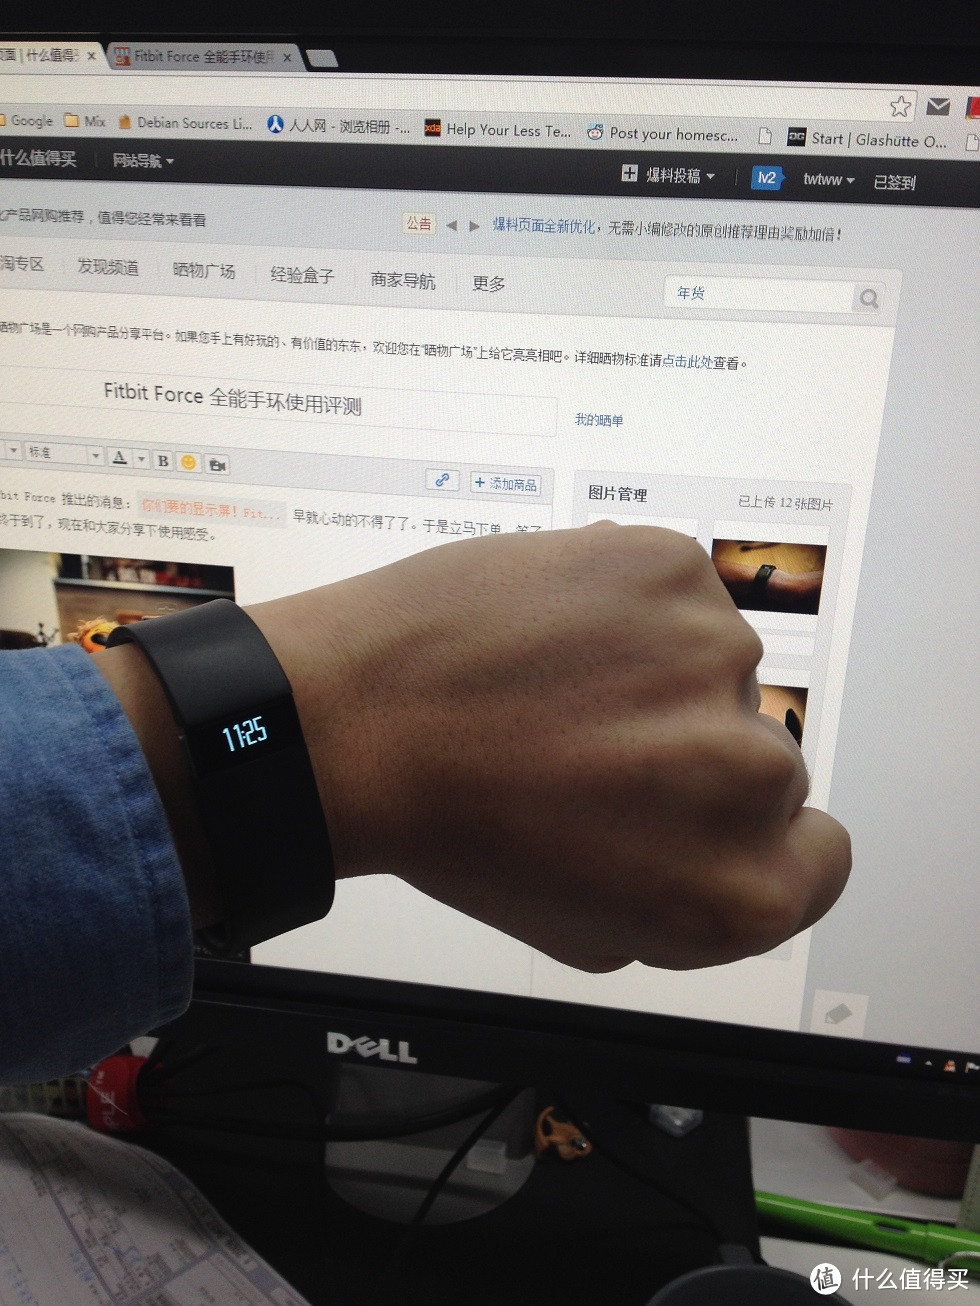 Fitbit Force 智能手环使用评测